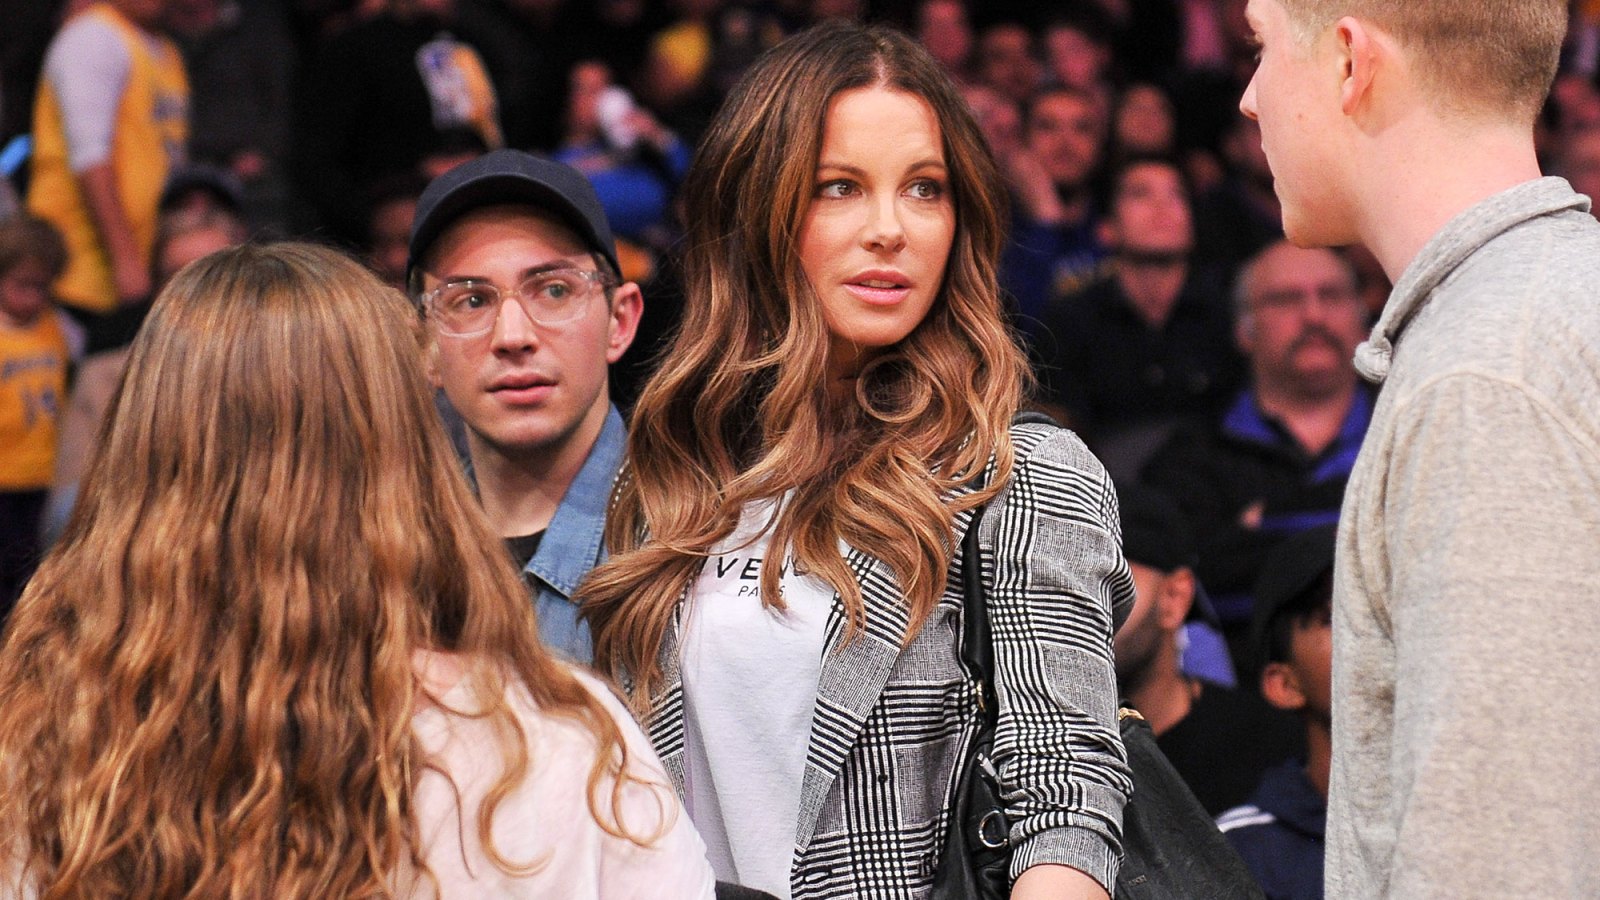 Kate Beckinsale Fires Back at Commenter Who Asks If a Young Friend Is Her Son